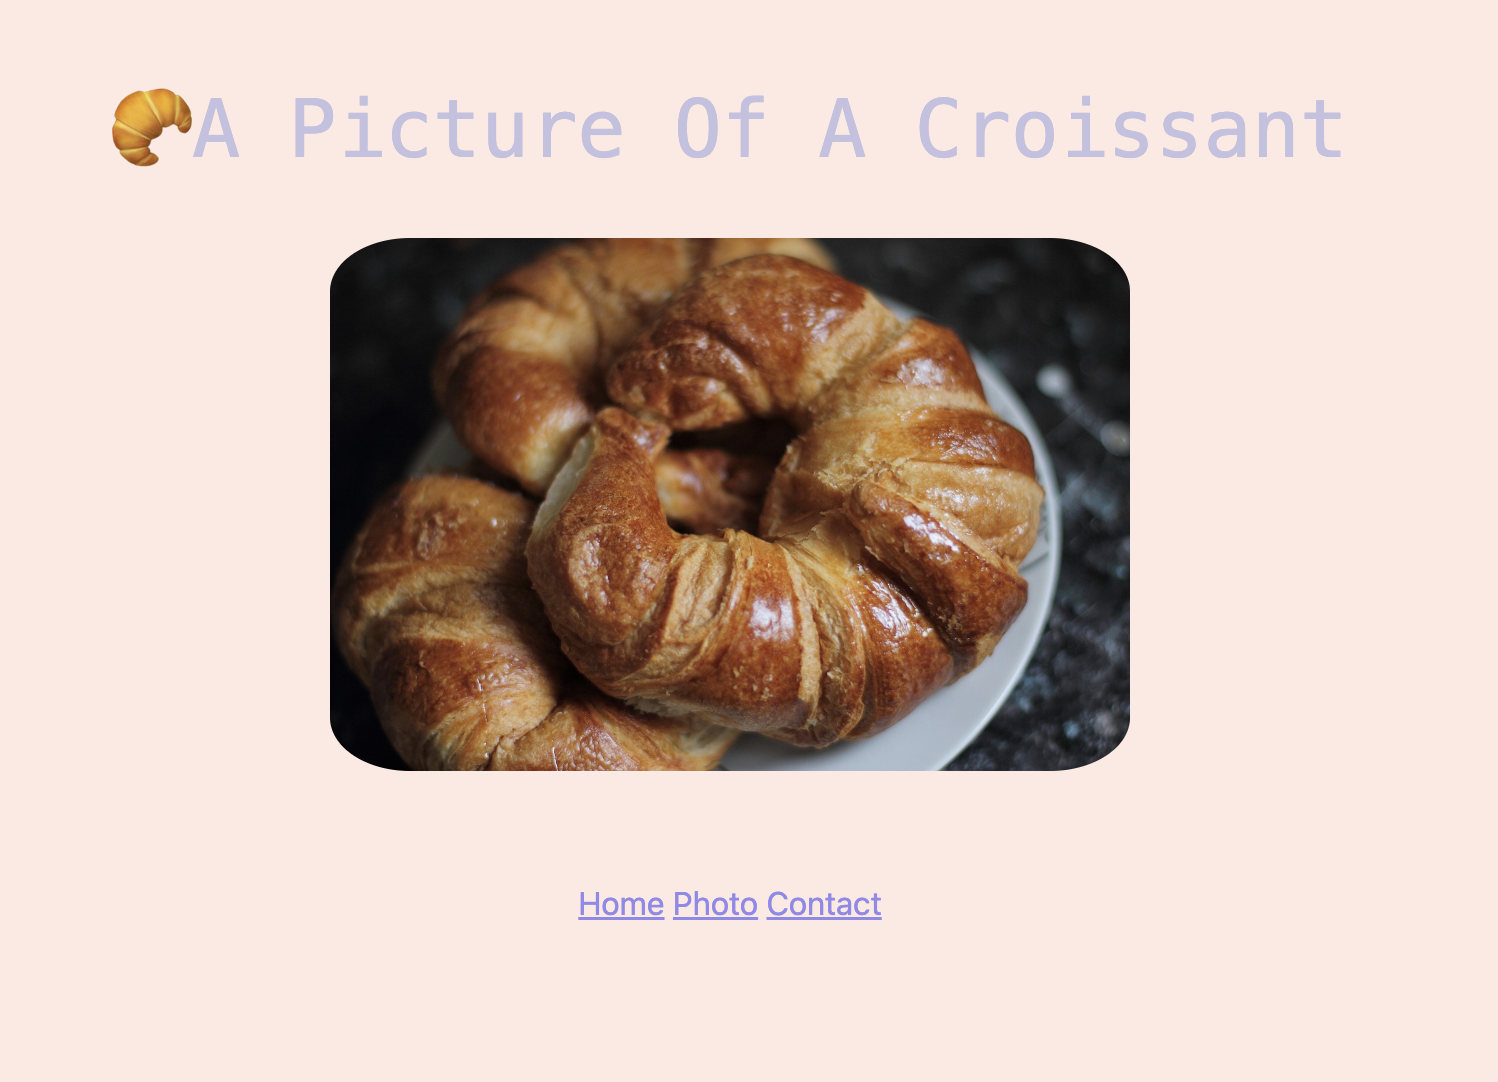  SheCodes croissant responsive project.